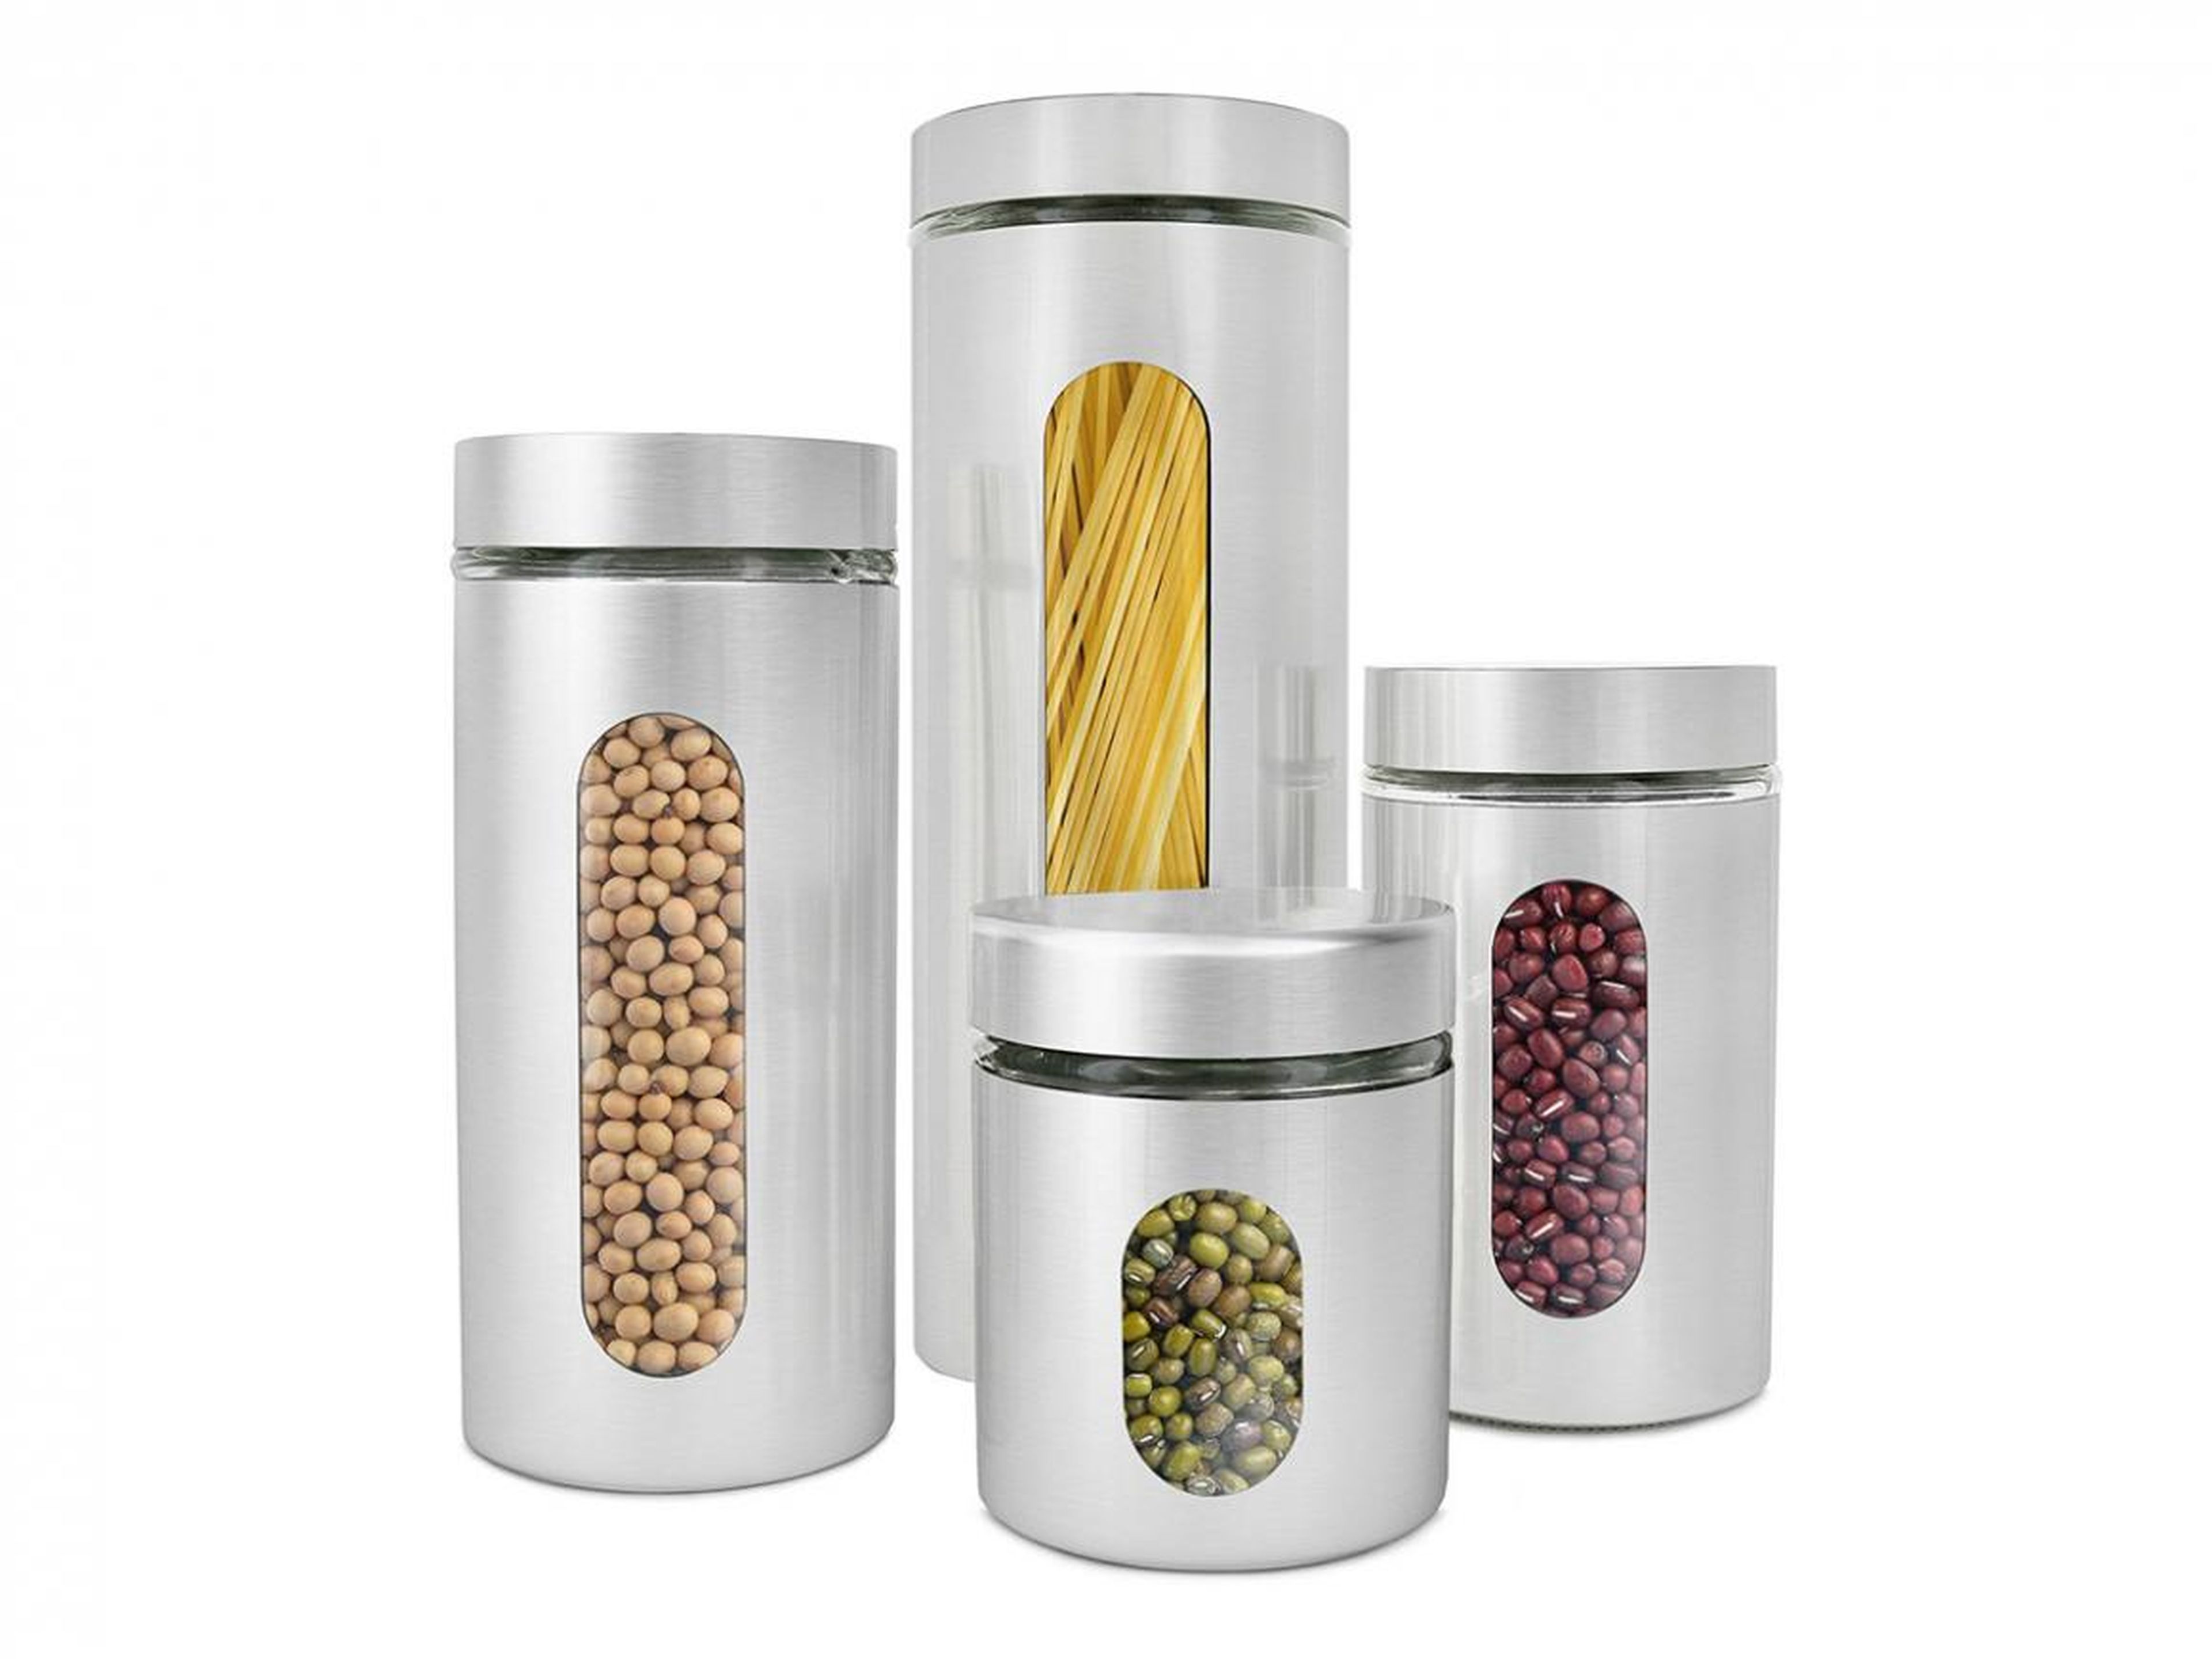 Steel containers for pantry staples